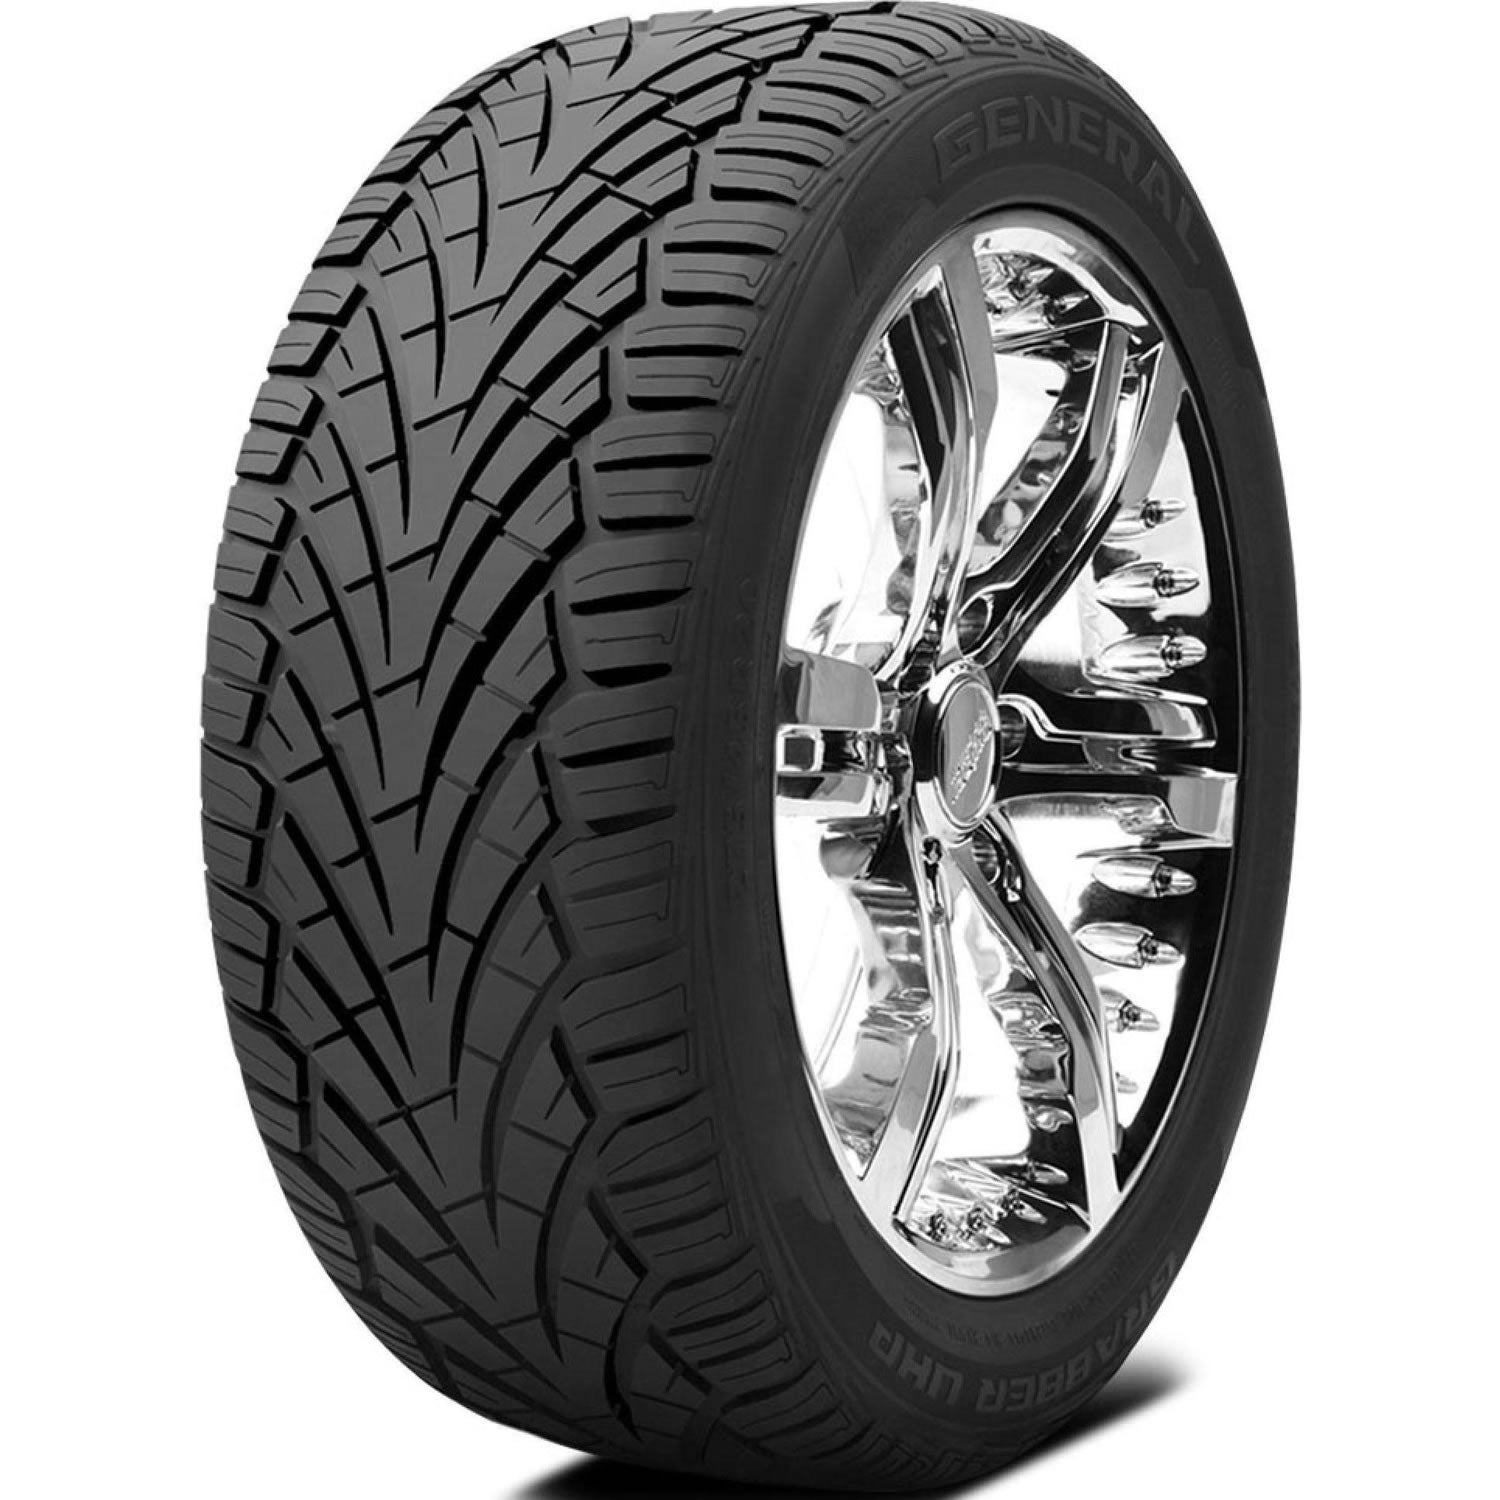 GENERAL GRABBER UHP 305/35R24 (32.4X12R 24) Tires